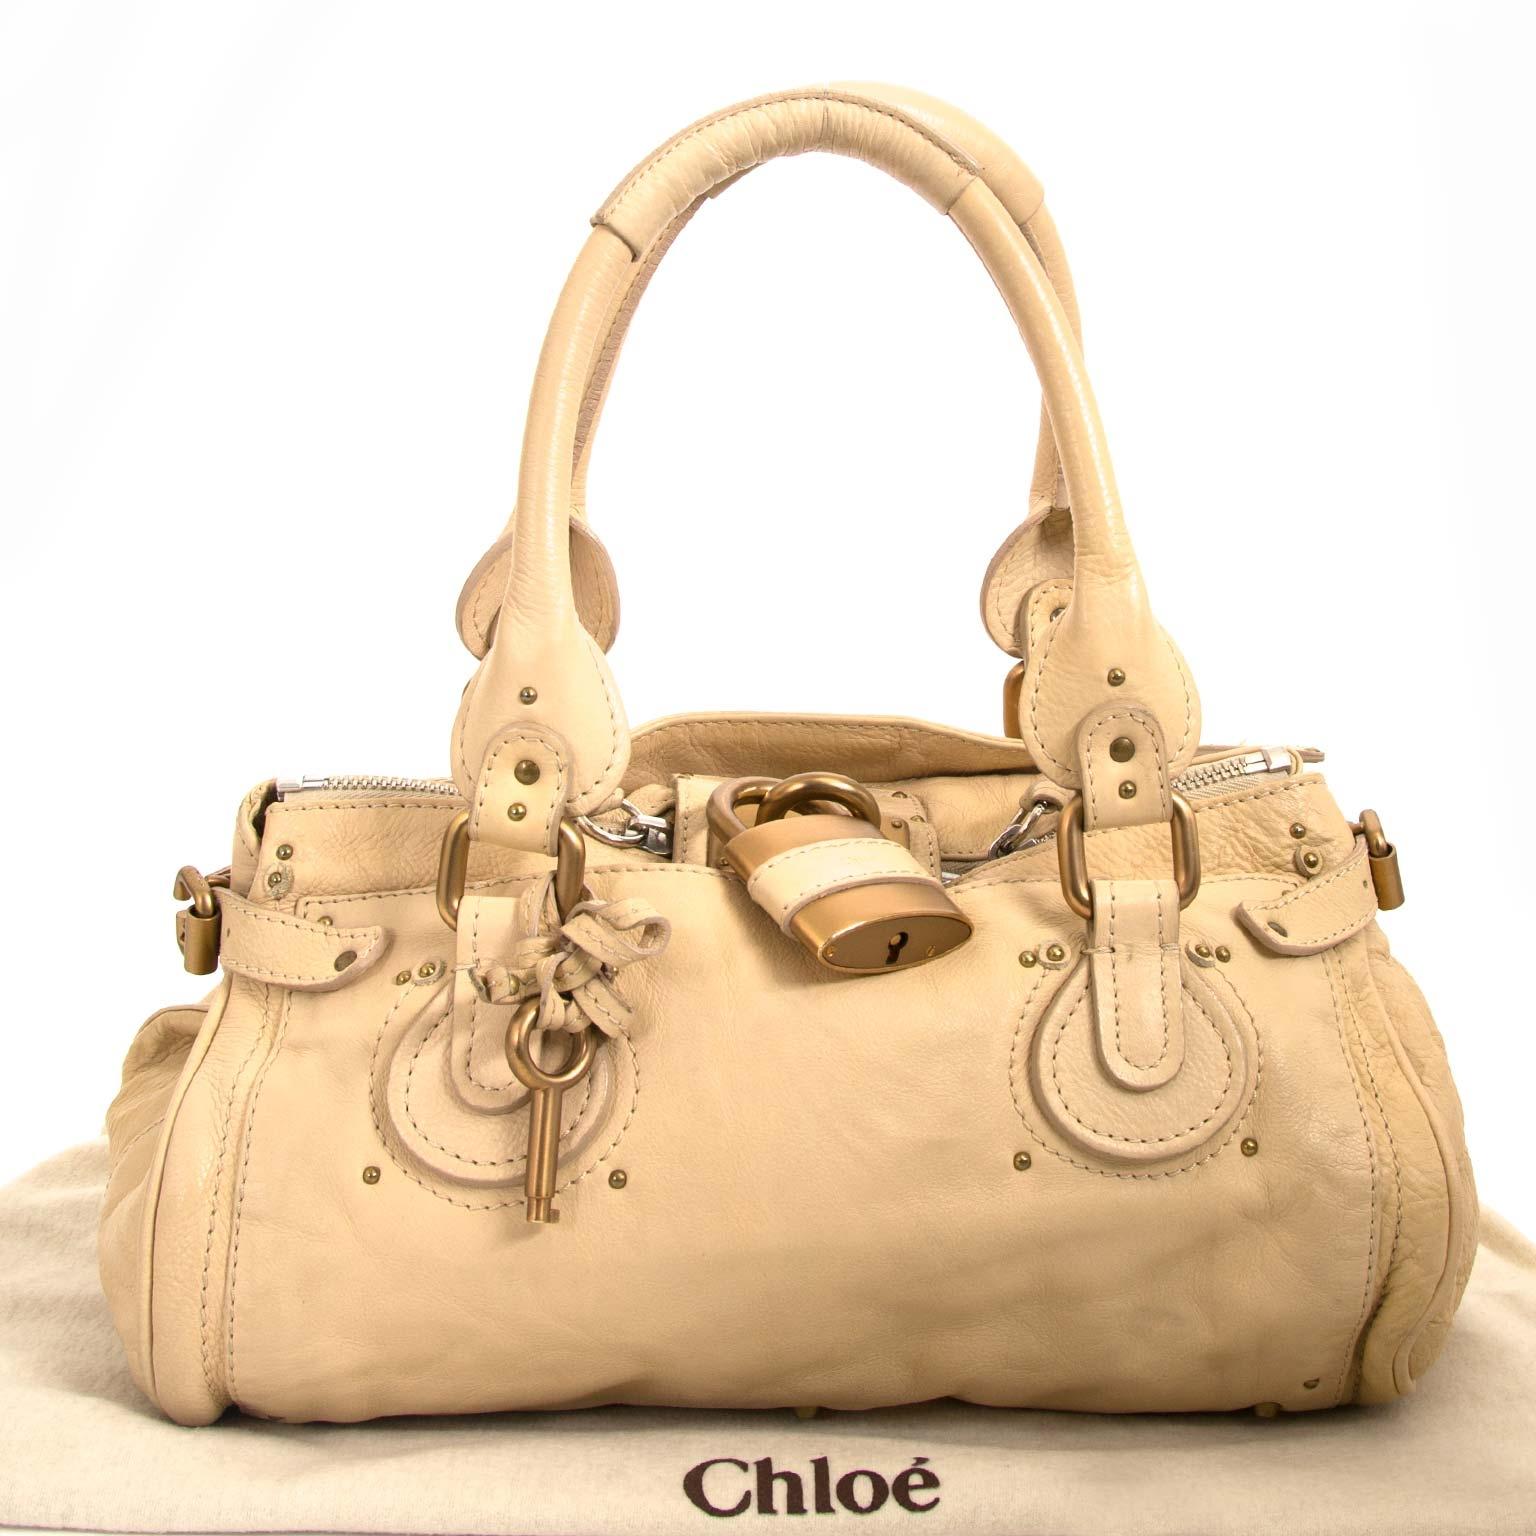 Good condition

Chloé White Cream Paddington Padlock Bag

This beautiful Chloé bag is crafted in white cream leather and features matte aged gold-tone hardware.
The bag has a double zipper closure with a fold-over oversized lock, that opens up to